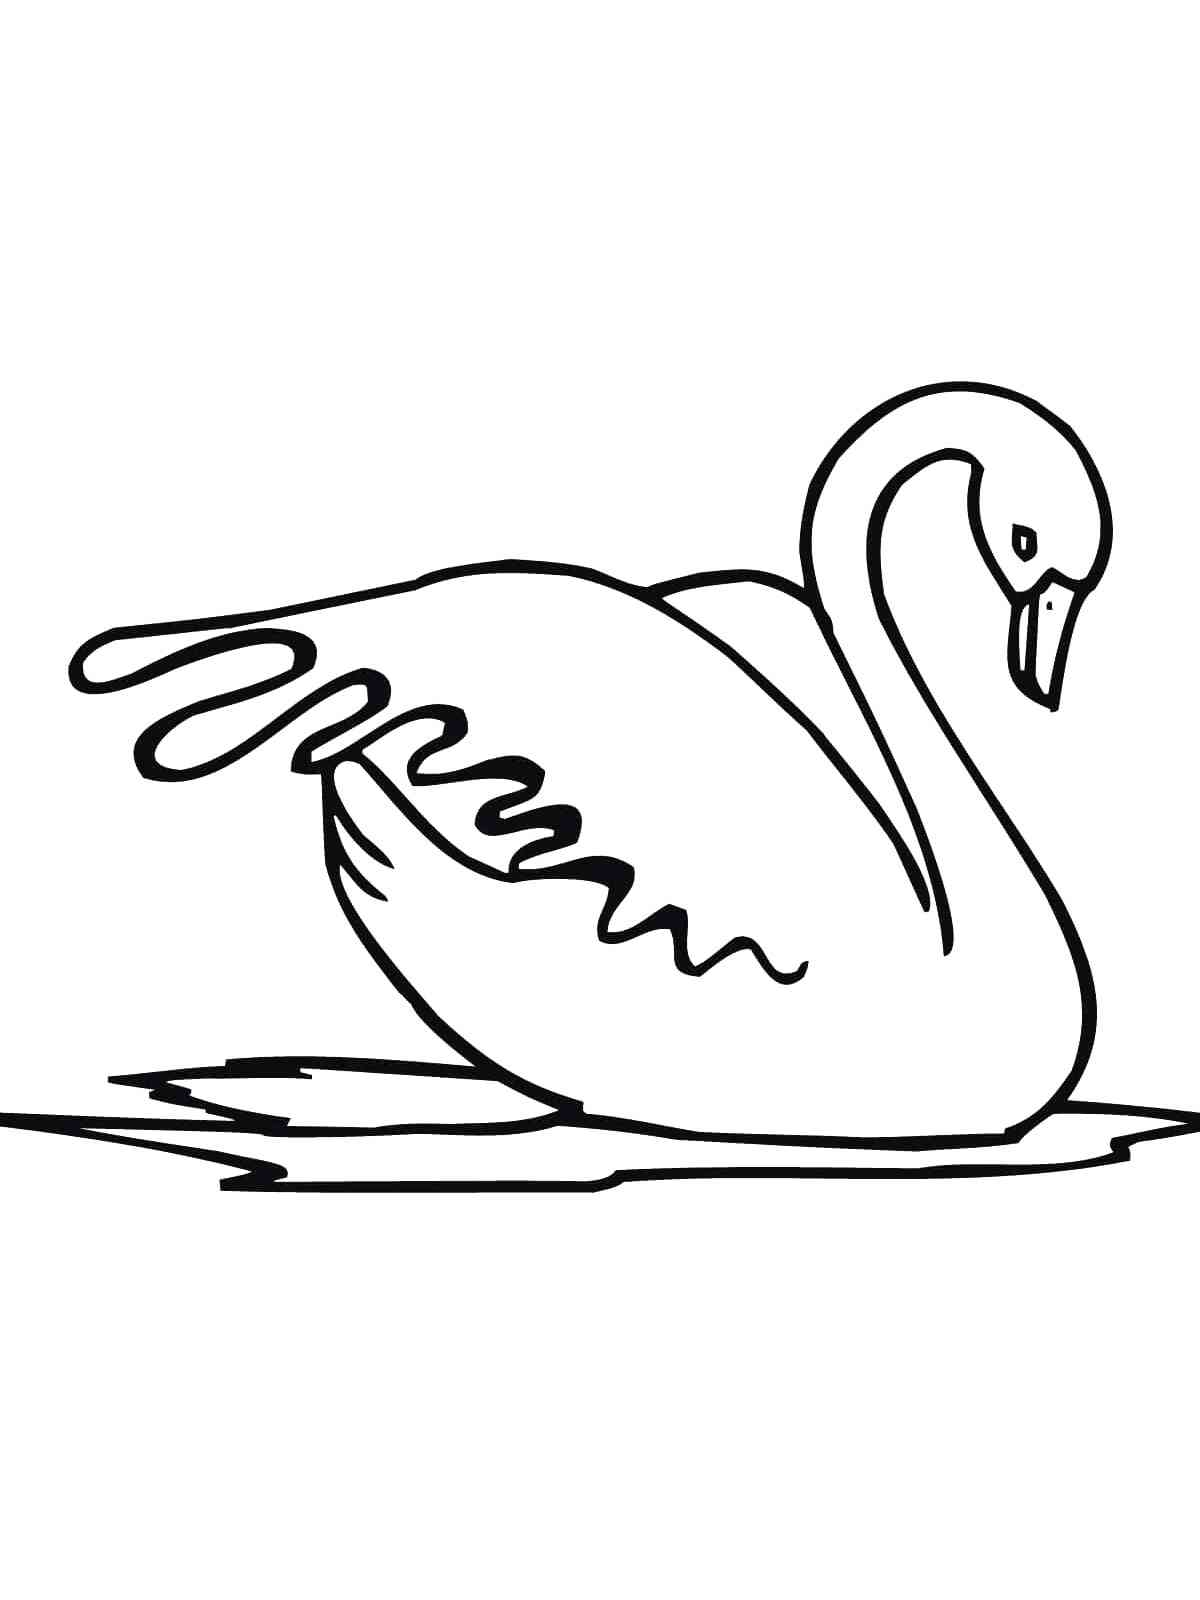 Swan coloring pages. Download and print Swan coloring pages